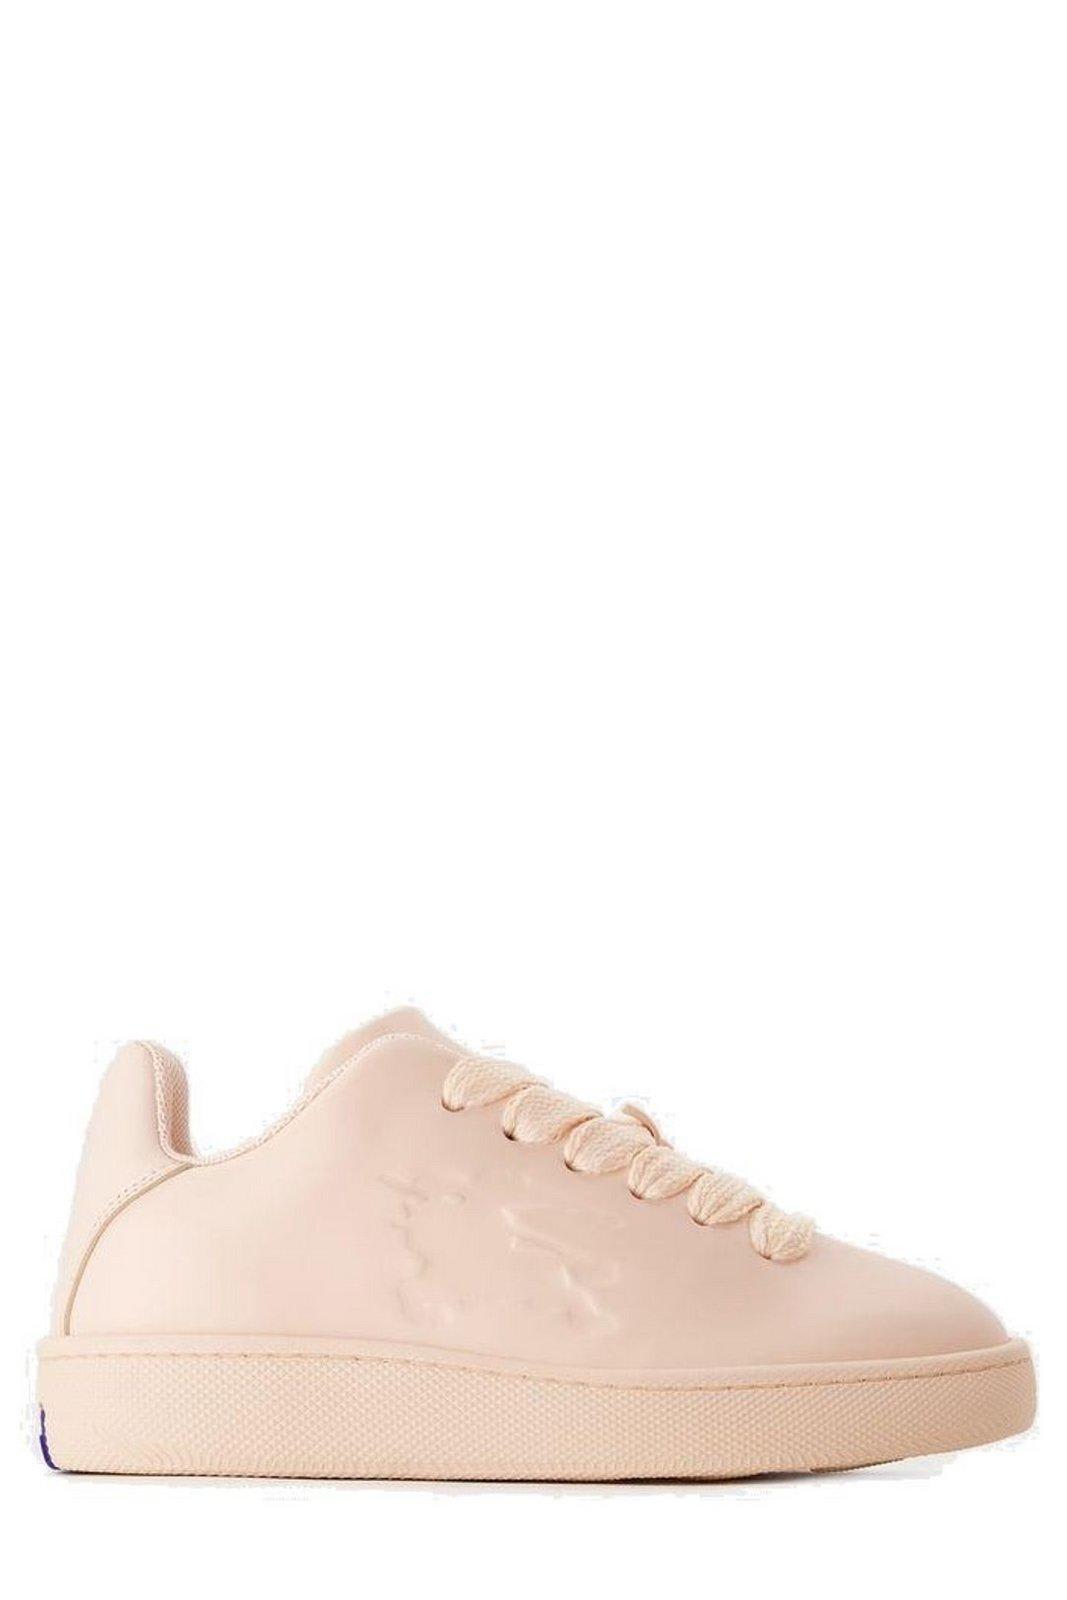 Shop Burberry Box Equestrian Knight Embossed Sneakers In Rosa